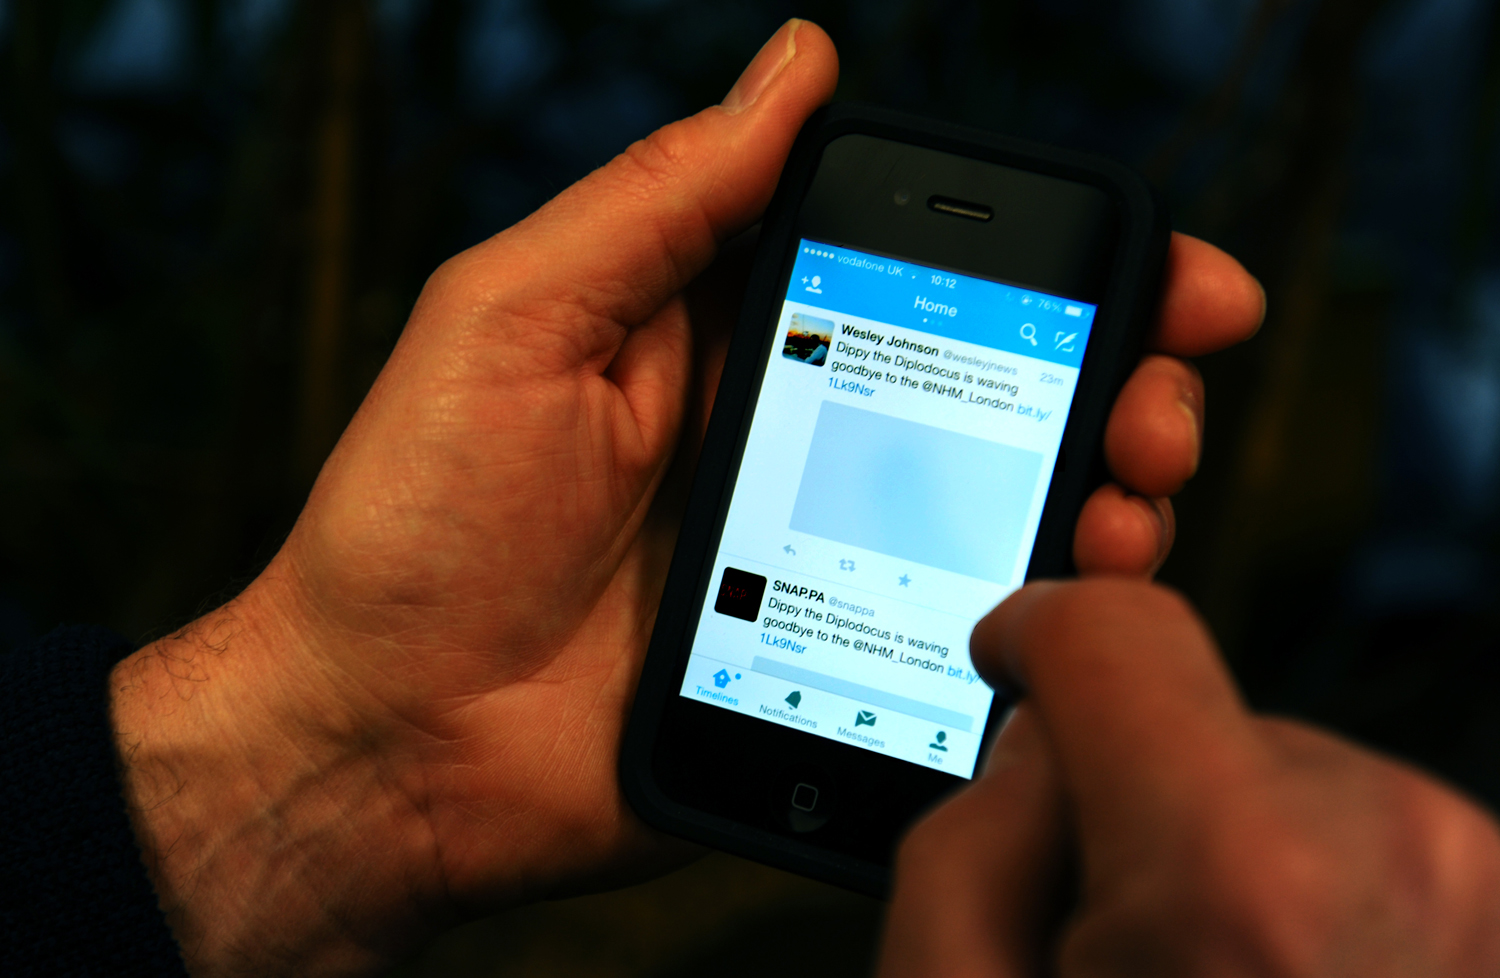 The Twitter App is shown on an Apple iPhone 4S. (Lauren Hurley — Association Images)